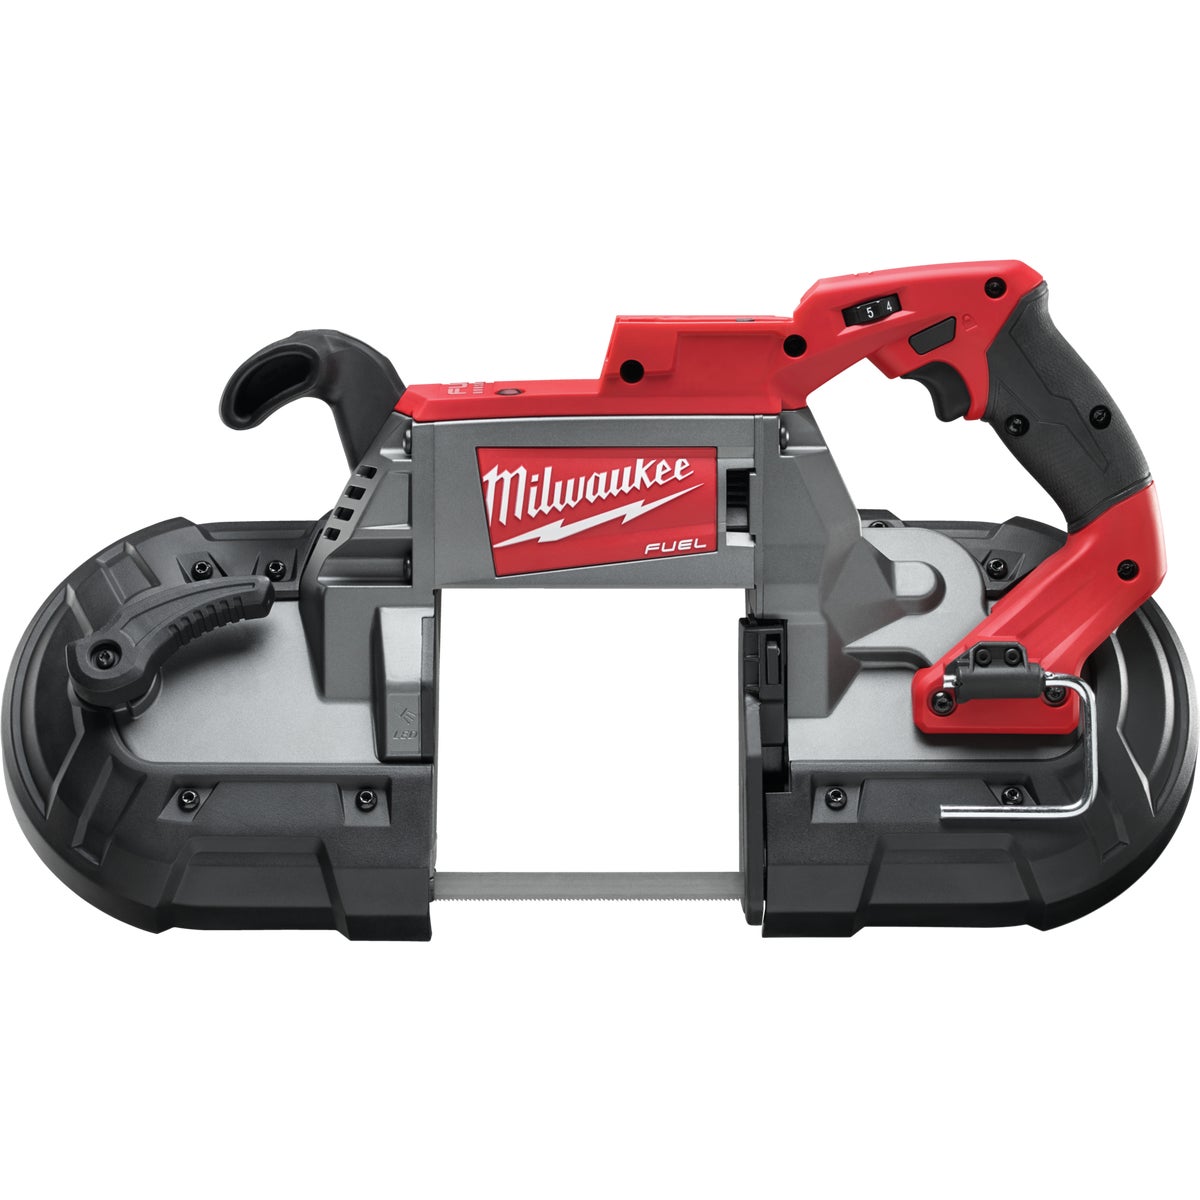 Milwaukee M18 FUEL 18 Volt Lithium-Ion Brushless Deep Cut Cordless Band Saw (Tool Only)